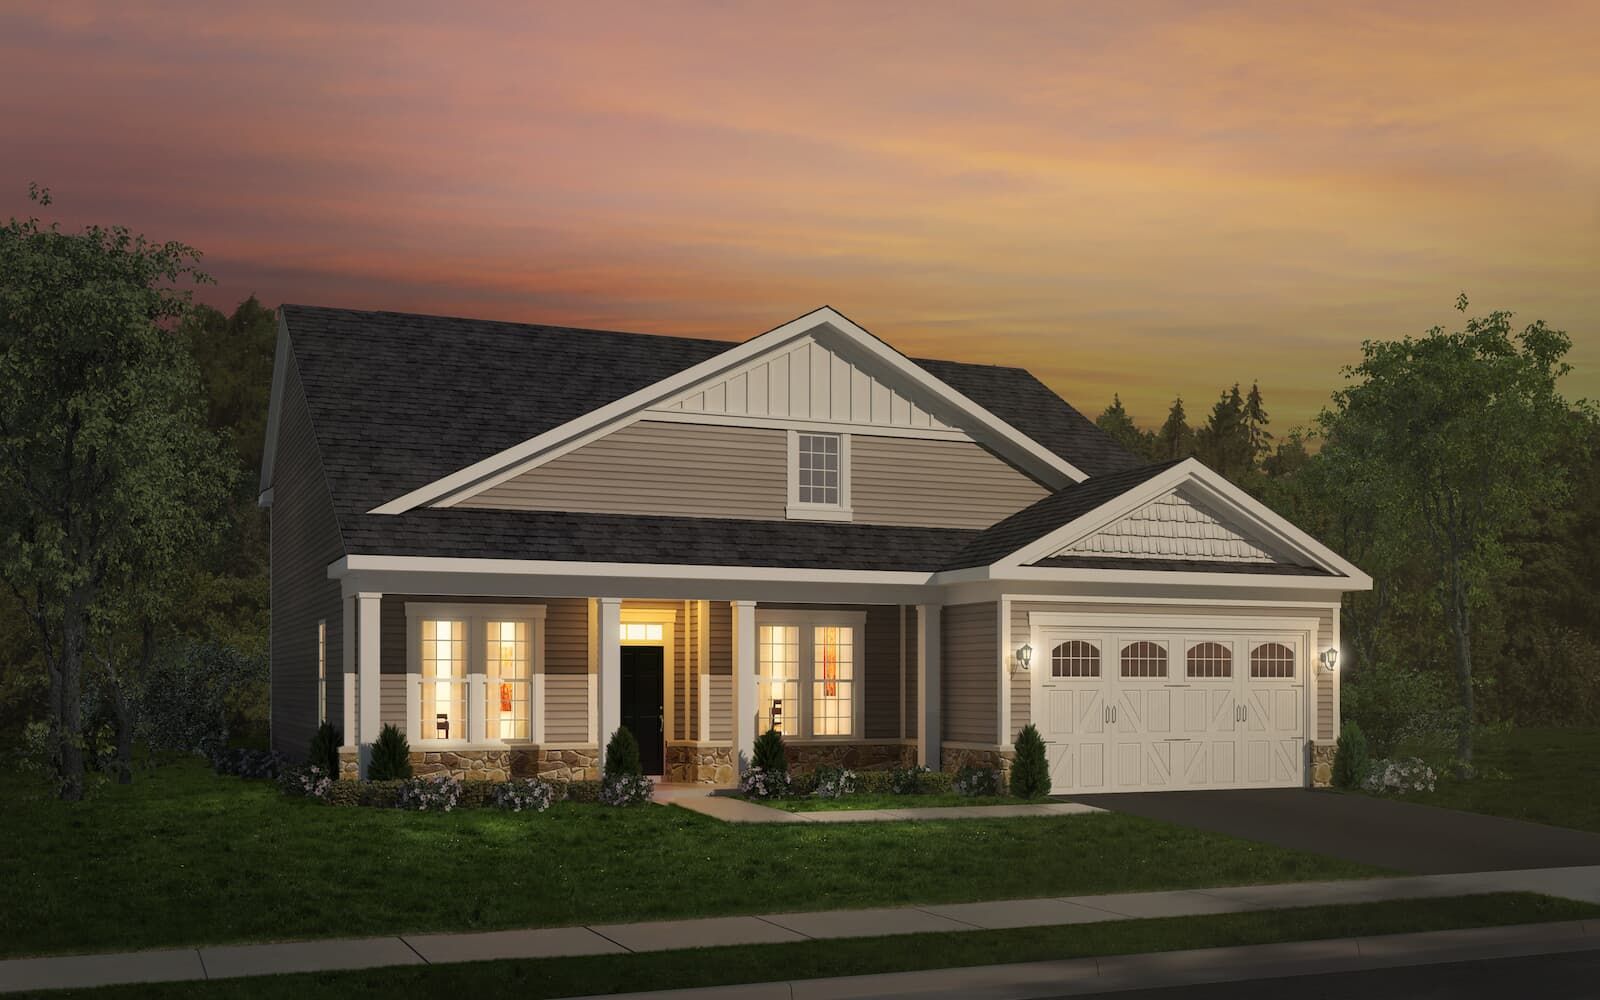 Elevation 1:Elevation 1 of the Pearson a home design offered at Heritage Shores in Bridgeville DE by Brookfield Residential